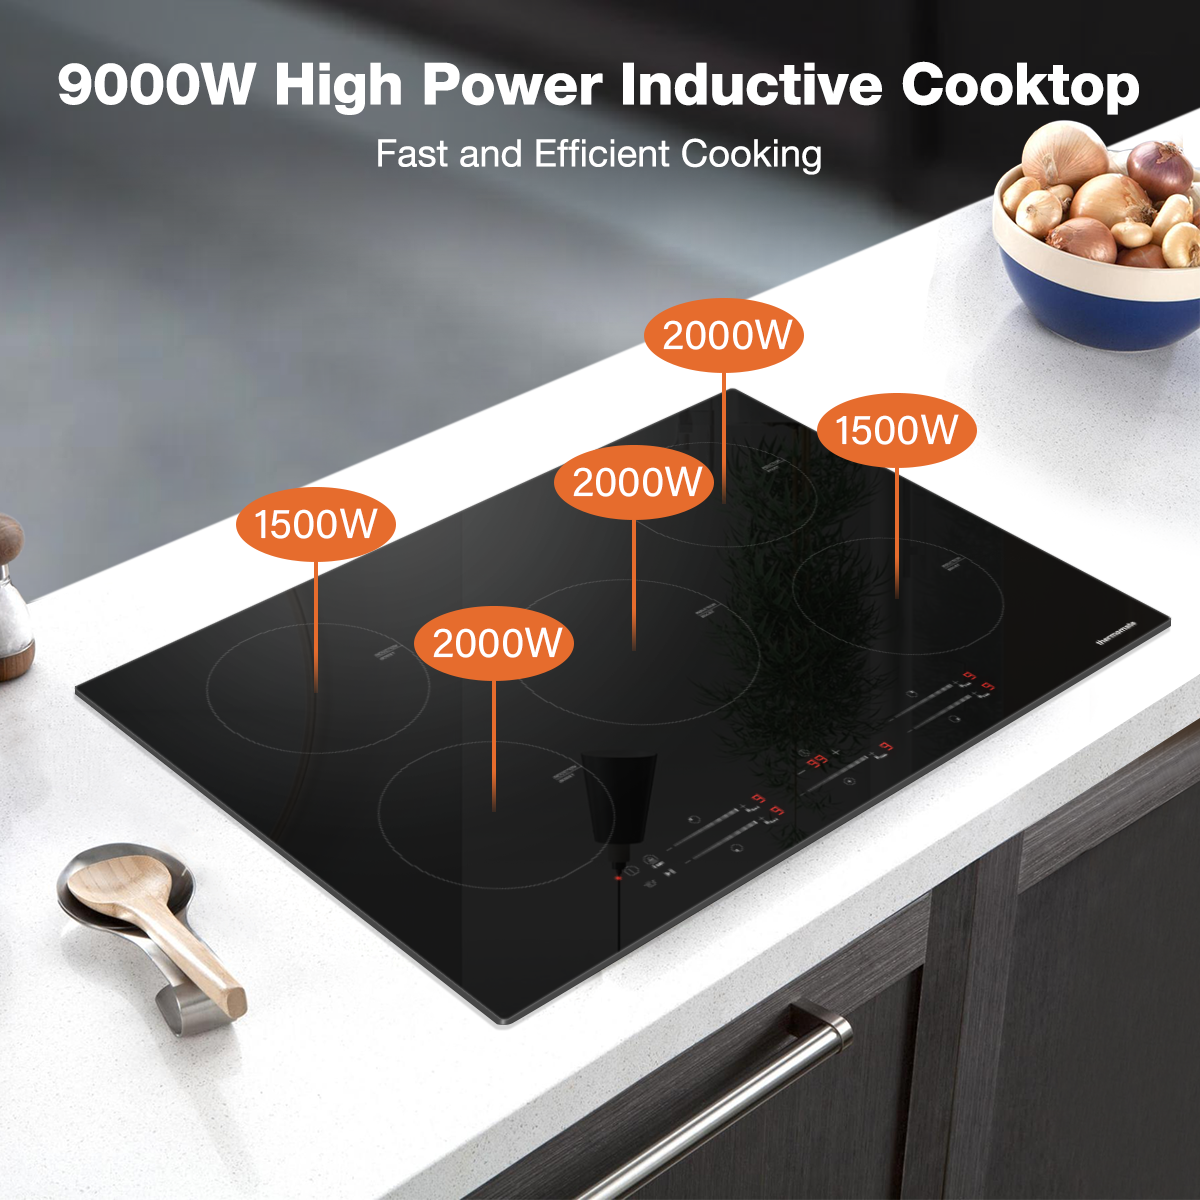 9000W High Power Inductive Cooktop | Thermomate